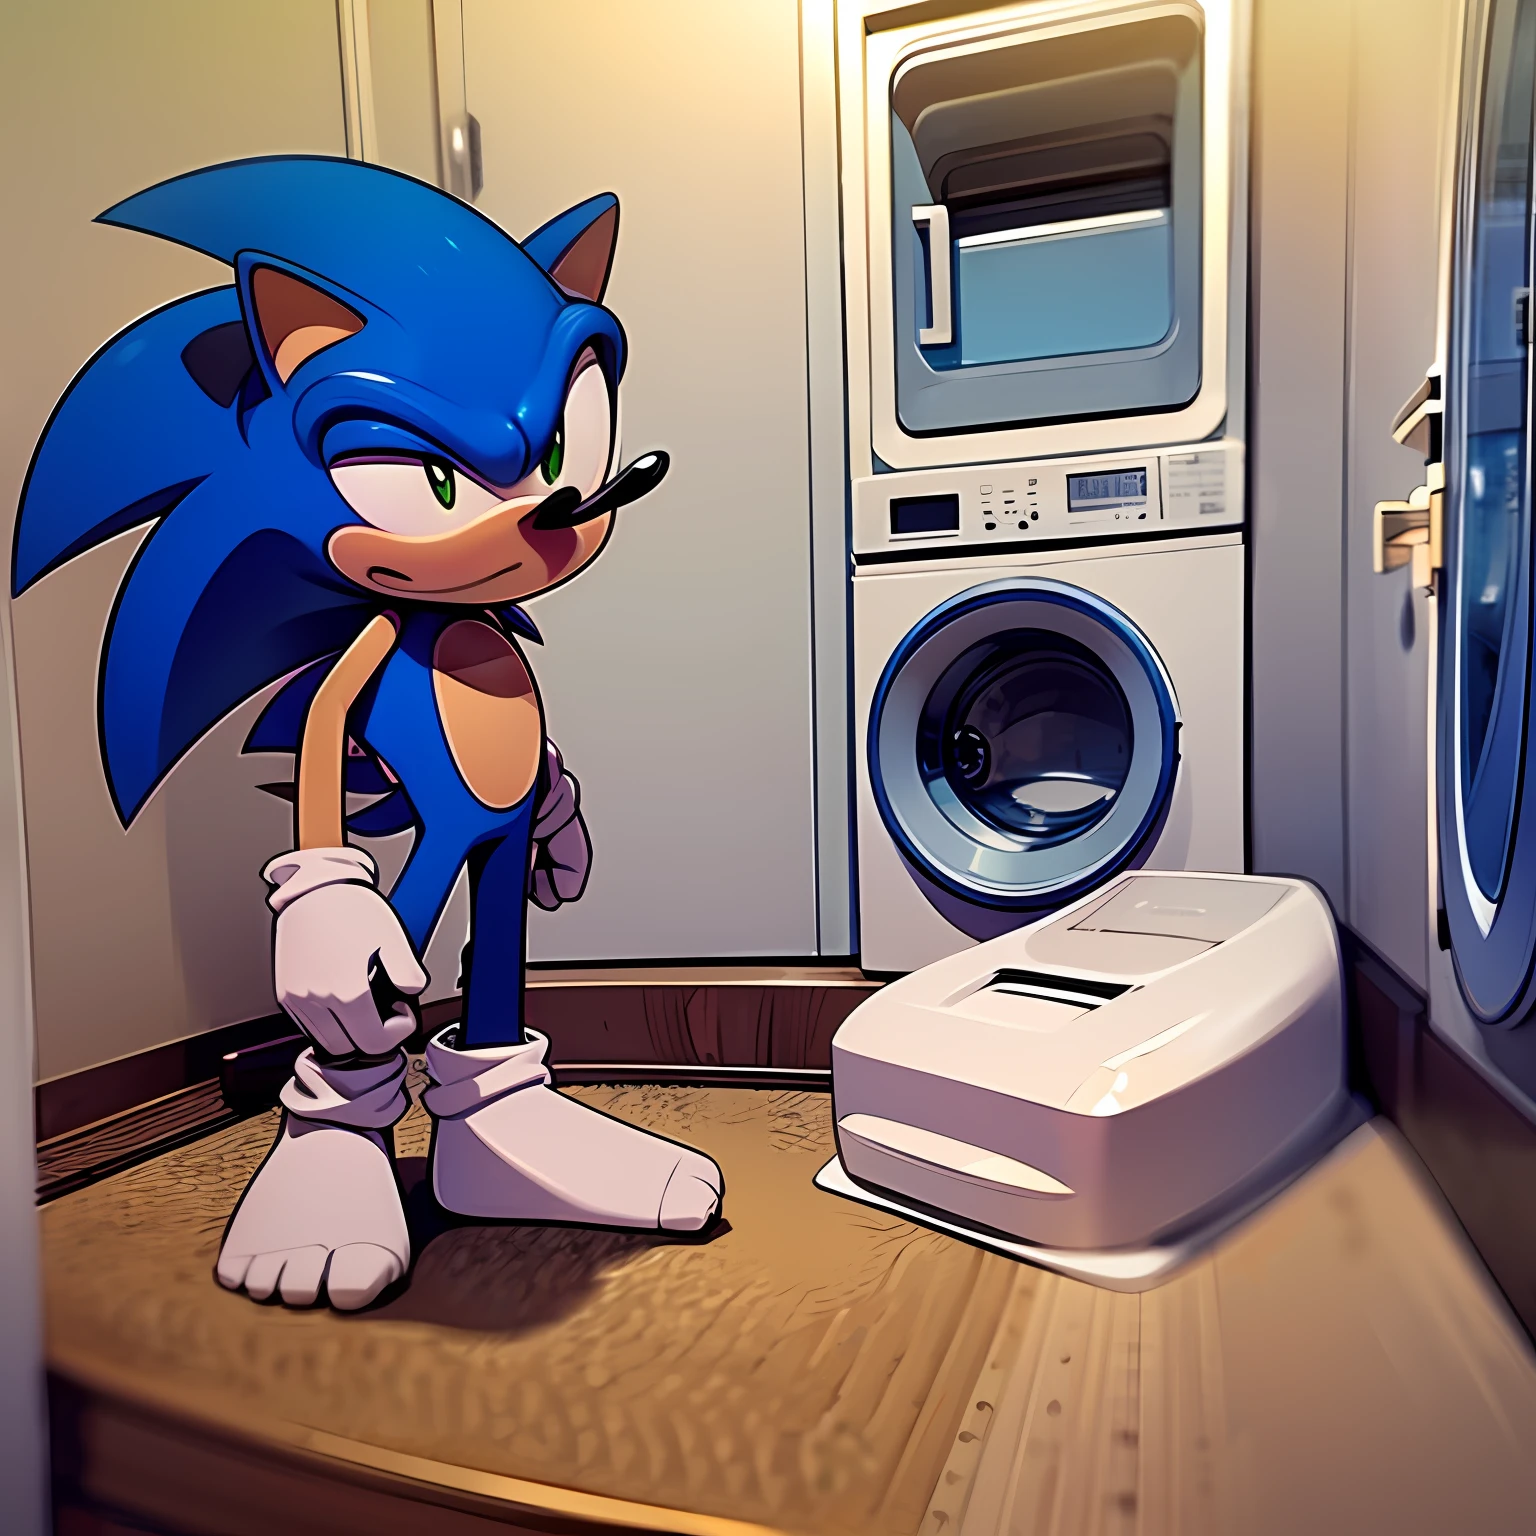 Sonic the hedgehog, laundry background, washing machine on the side of Sonic The Hedgehog, seated in a chair, chair on the side of the washing machine, Sonic The Hedgehog Without Shoes, no gloves, wearing white socks on their feet, ultra detaild, well done, Perfect Anatomia, waiting, holding a newspaper, Reading the newspaper, 2d